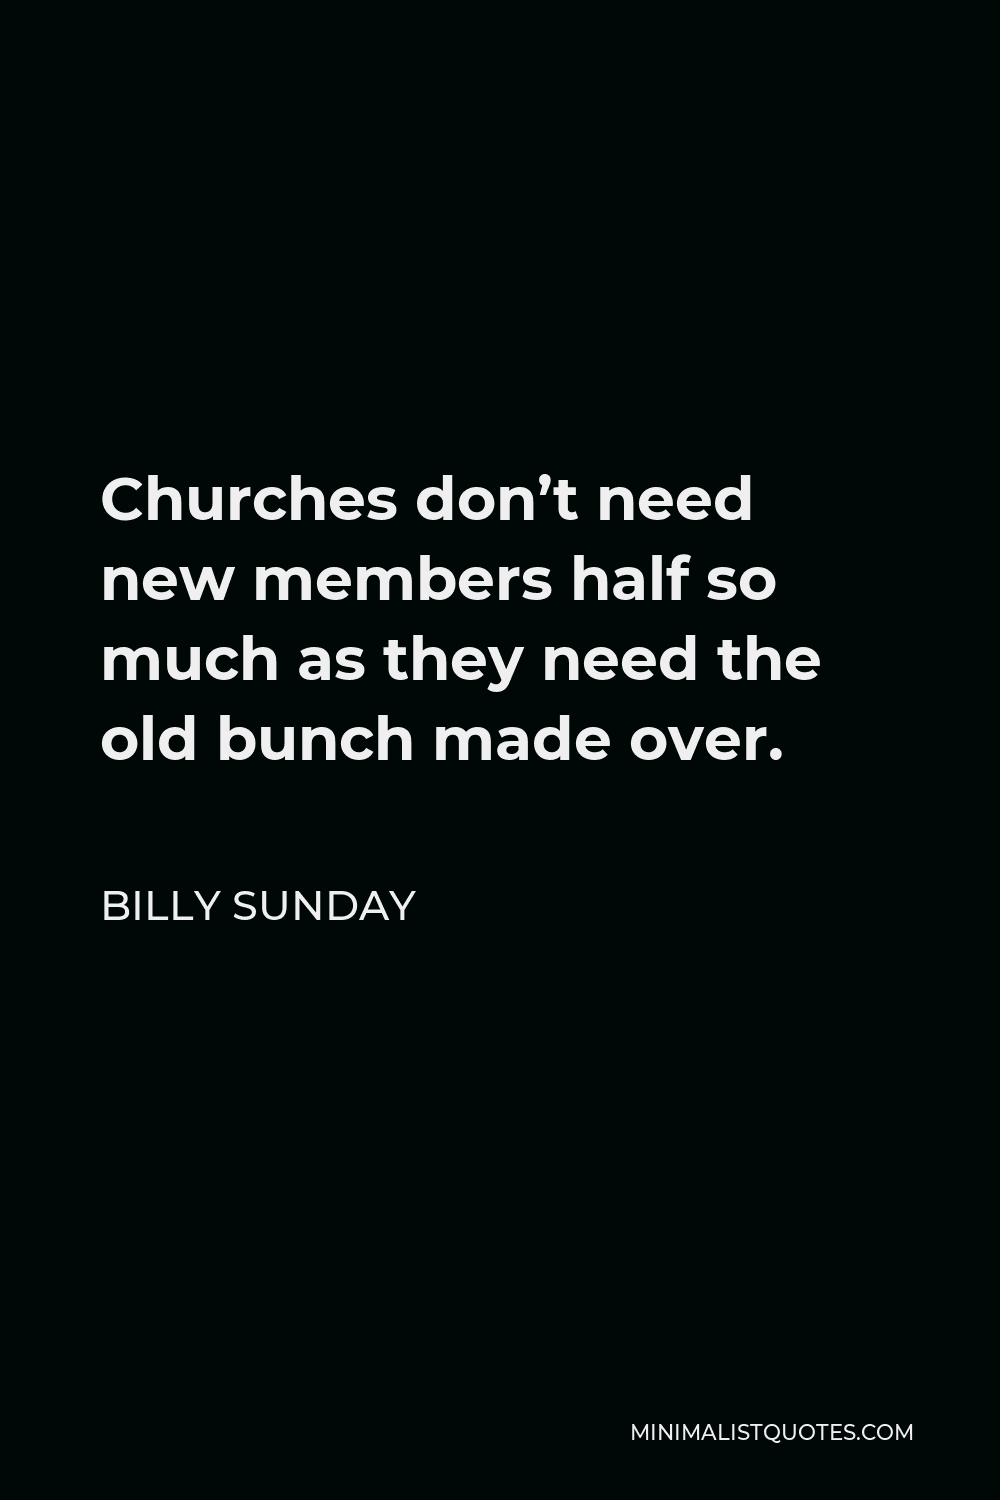 Billy Sunday Quote - Churches don’t need new members half so much as they need the old bunch made over.